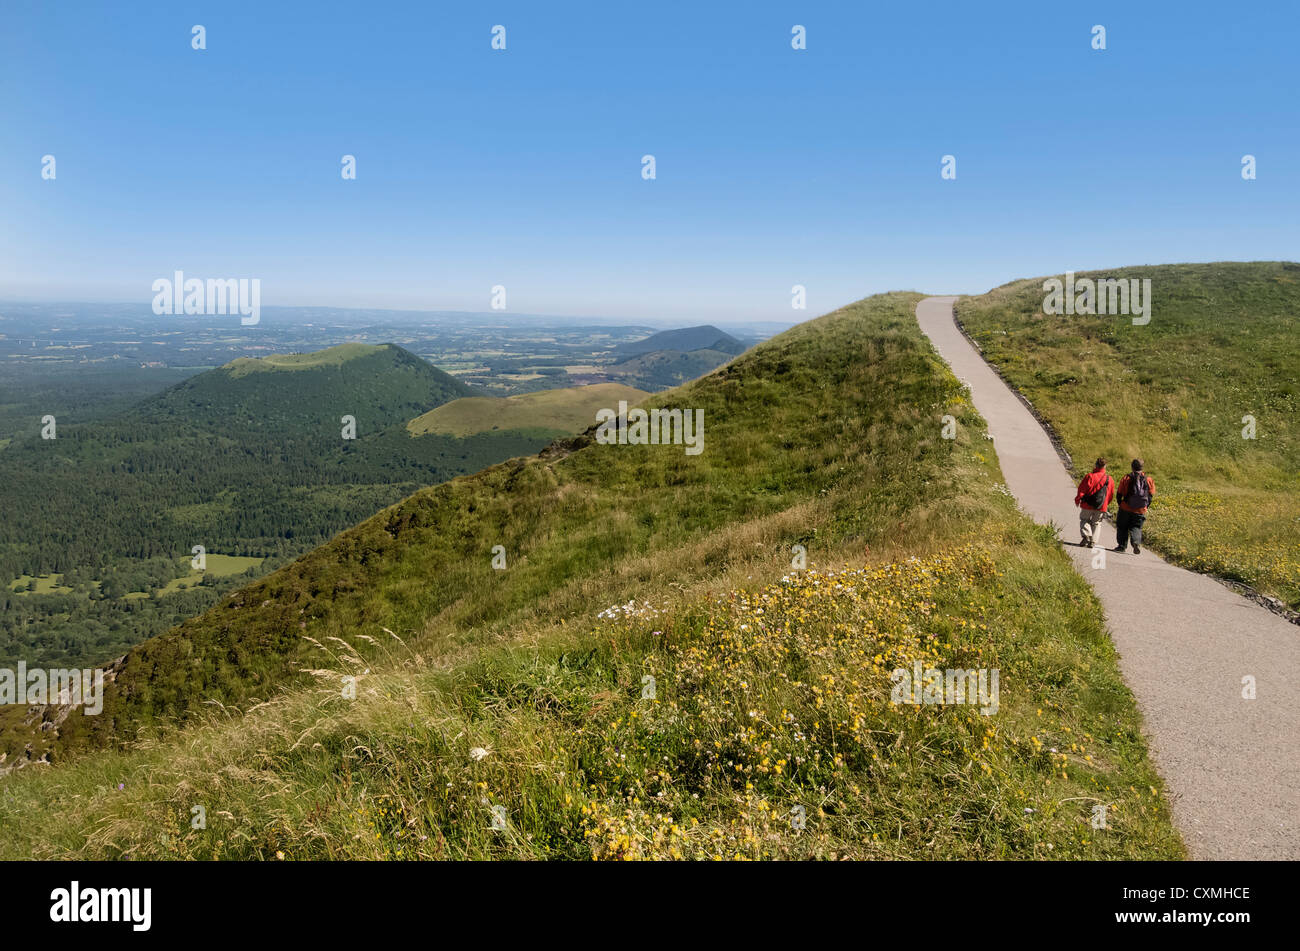 Hikers and view from Puy de Dome onto the volcanic landscape of the Chaine des Puys, Massif Central, Auvergne, France, Europe Stock Photo